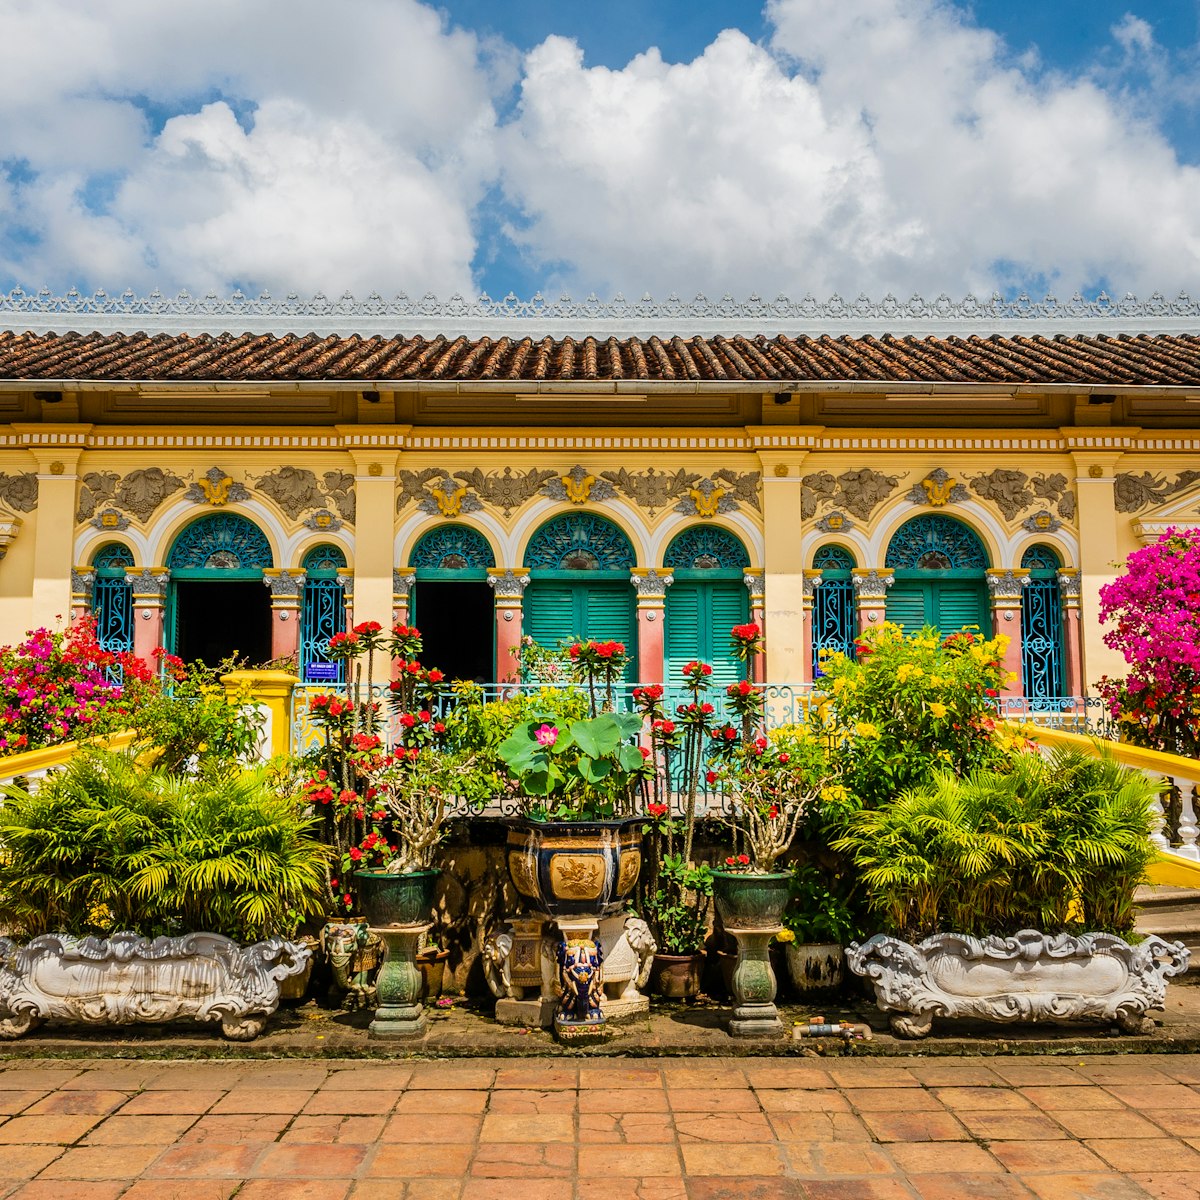 Binh Thuy ancient house is one of the rare French-style houses remaining in South, Vietnam.